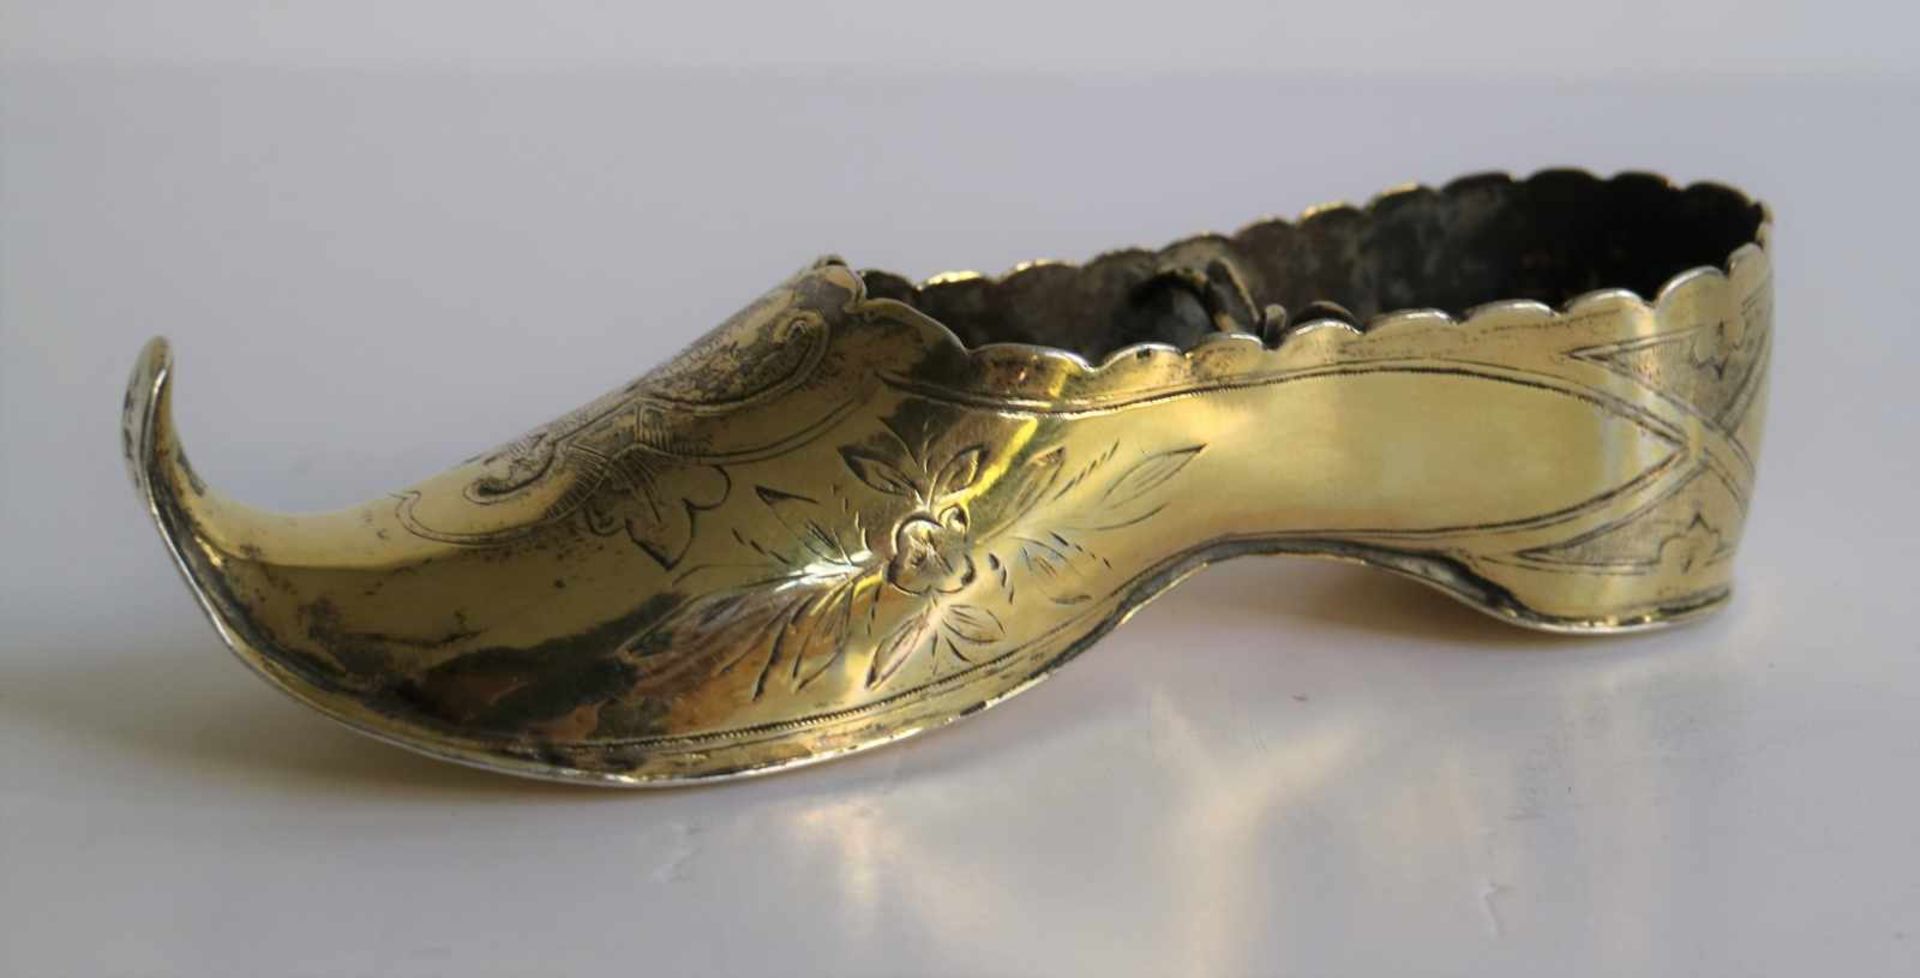 Russian shoe 19th century Gold-plated & silver with markings and dated 185 .. Saint Petersburg B 11